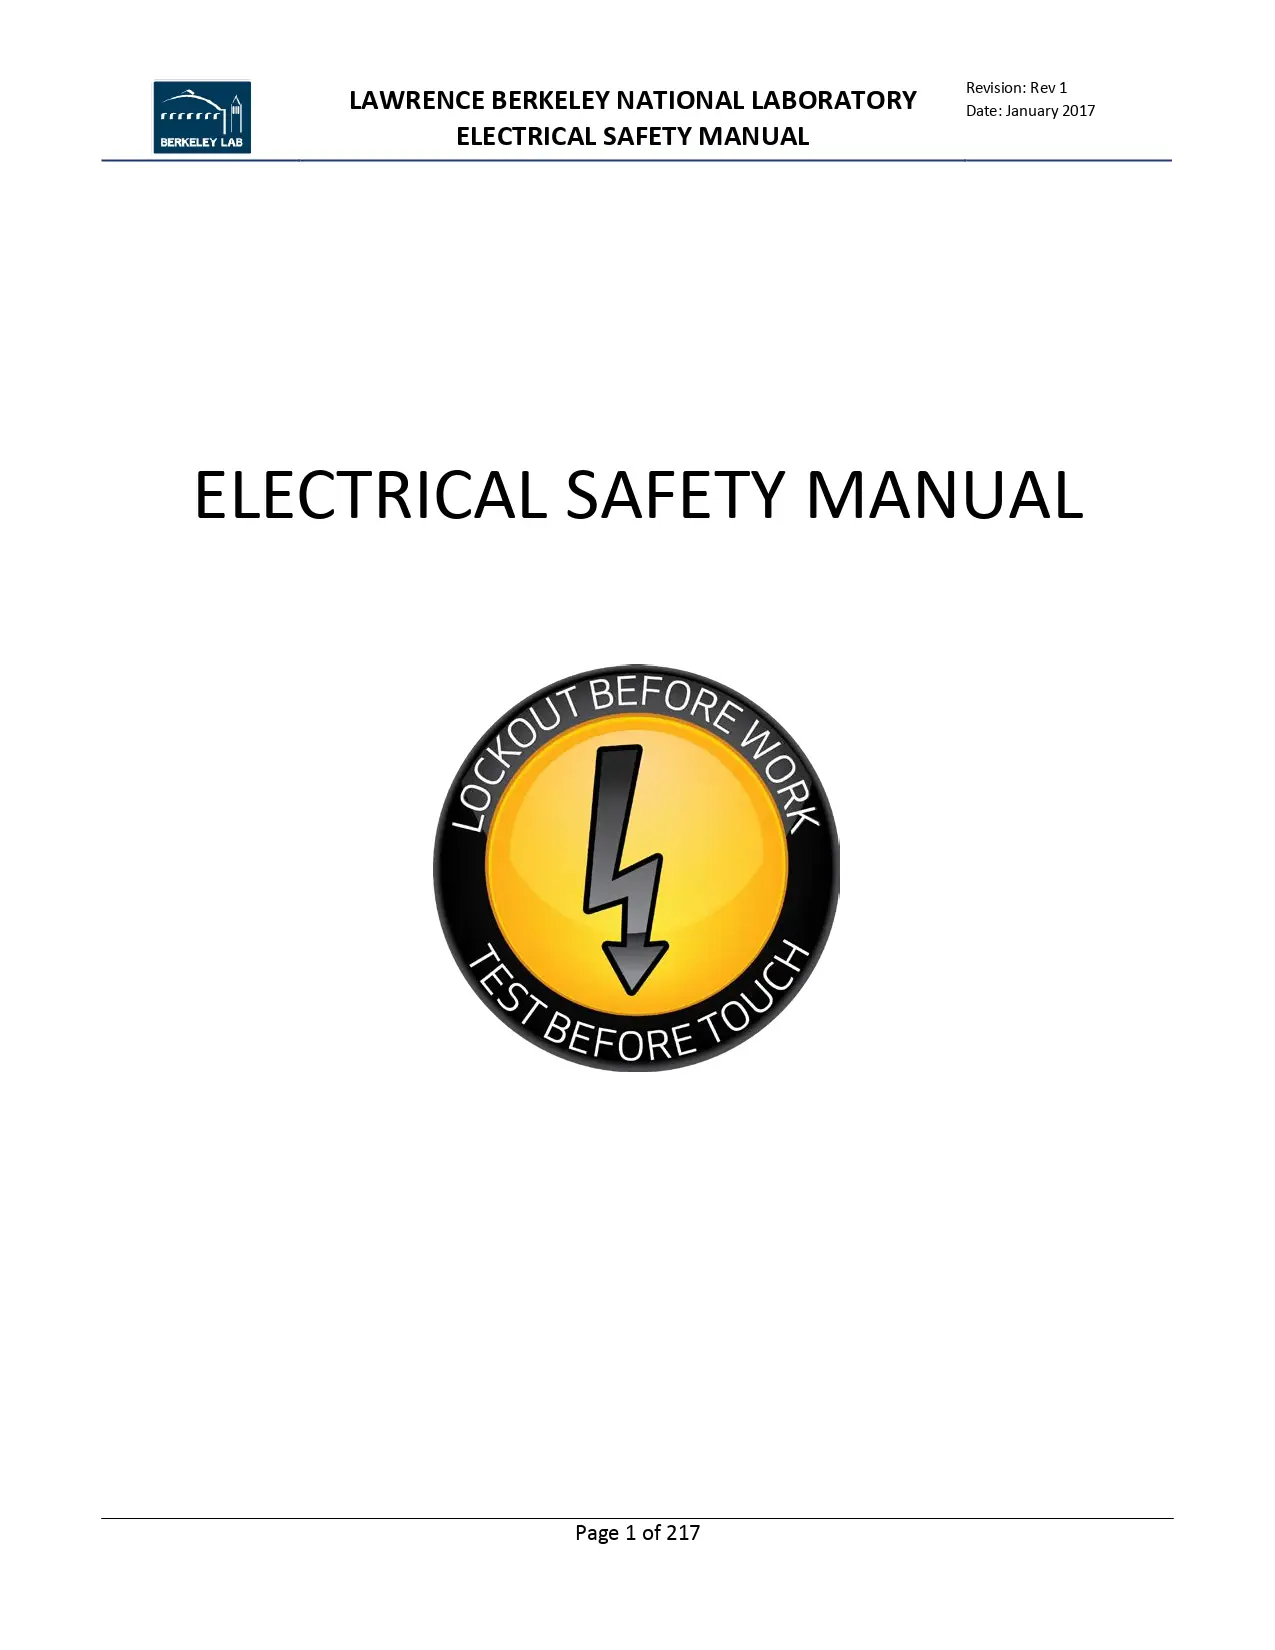 Electrical Safety Manual